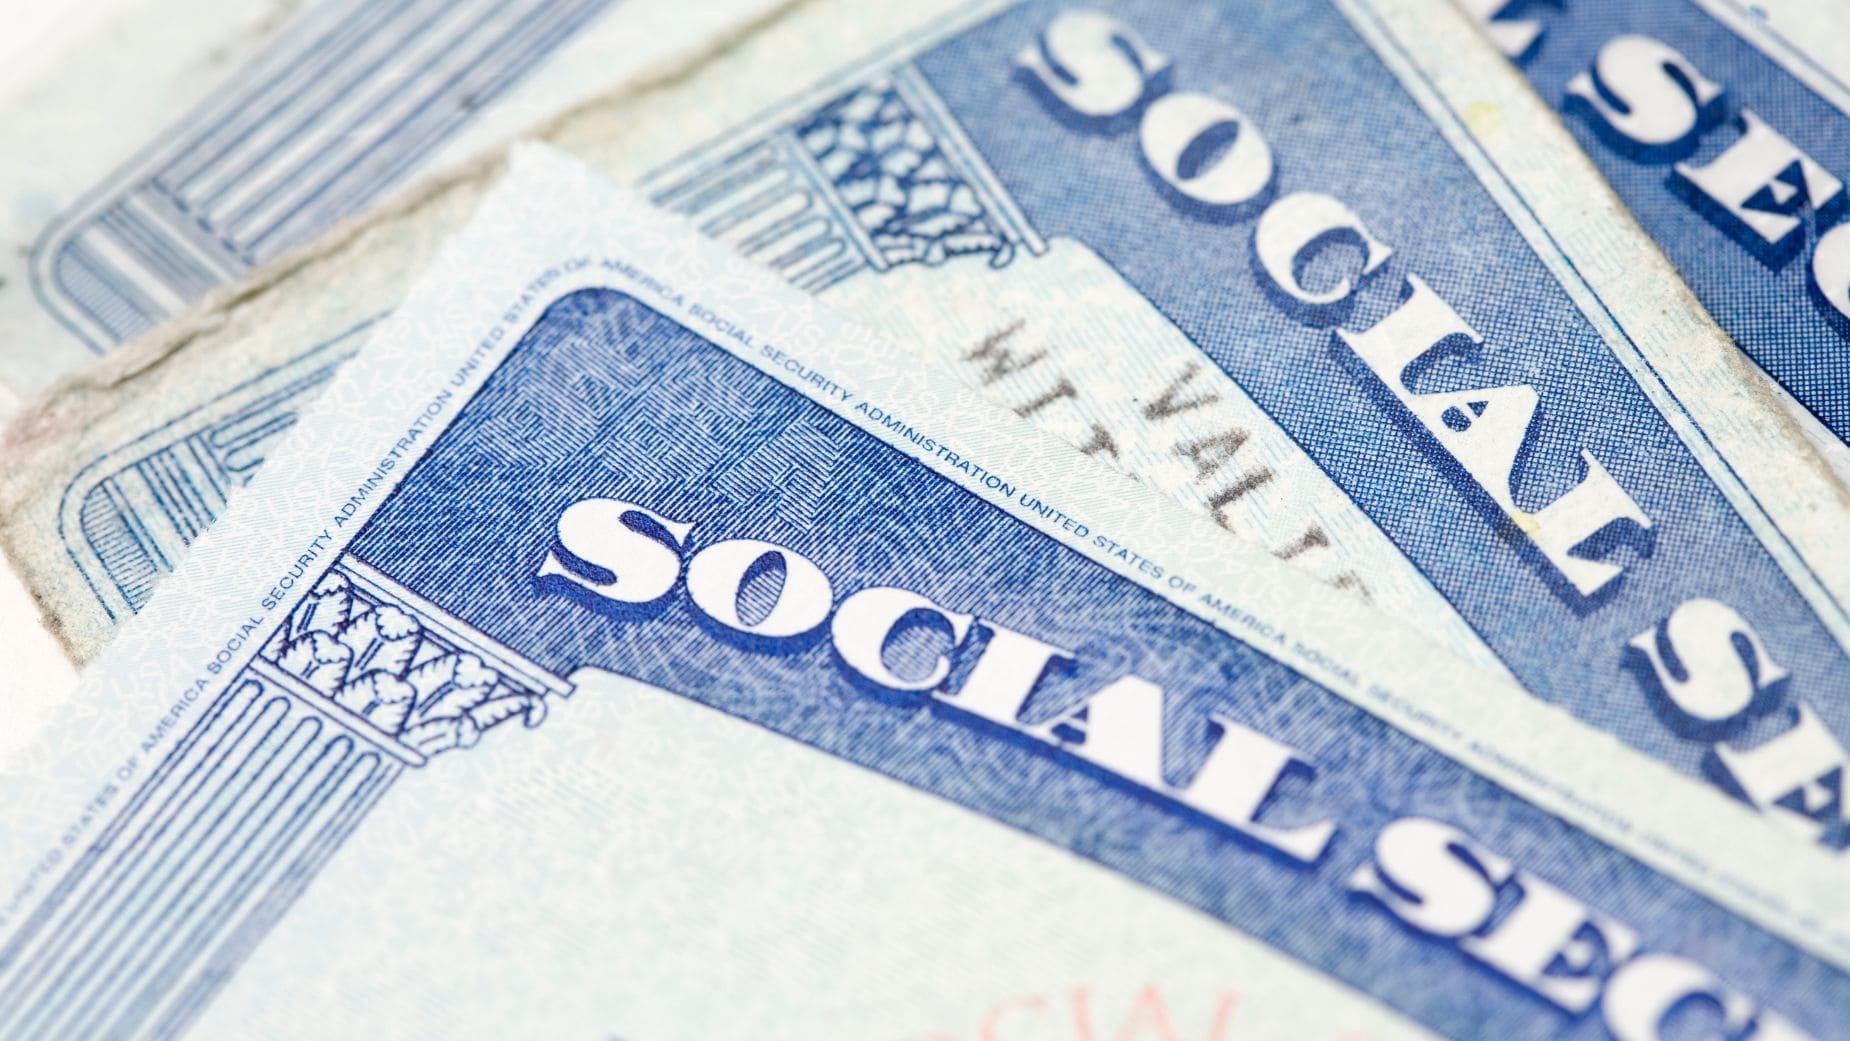 Find out the whole Social Security calendar for April